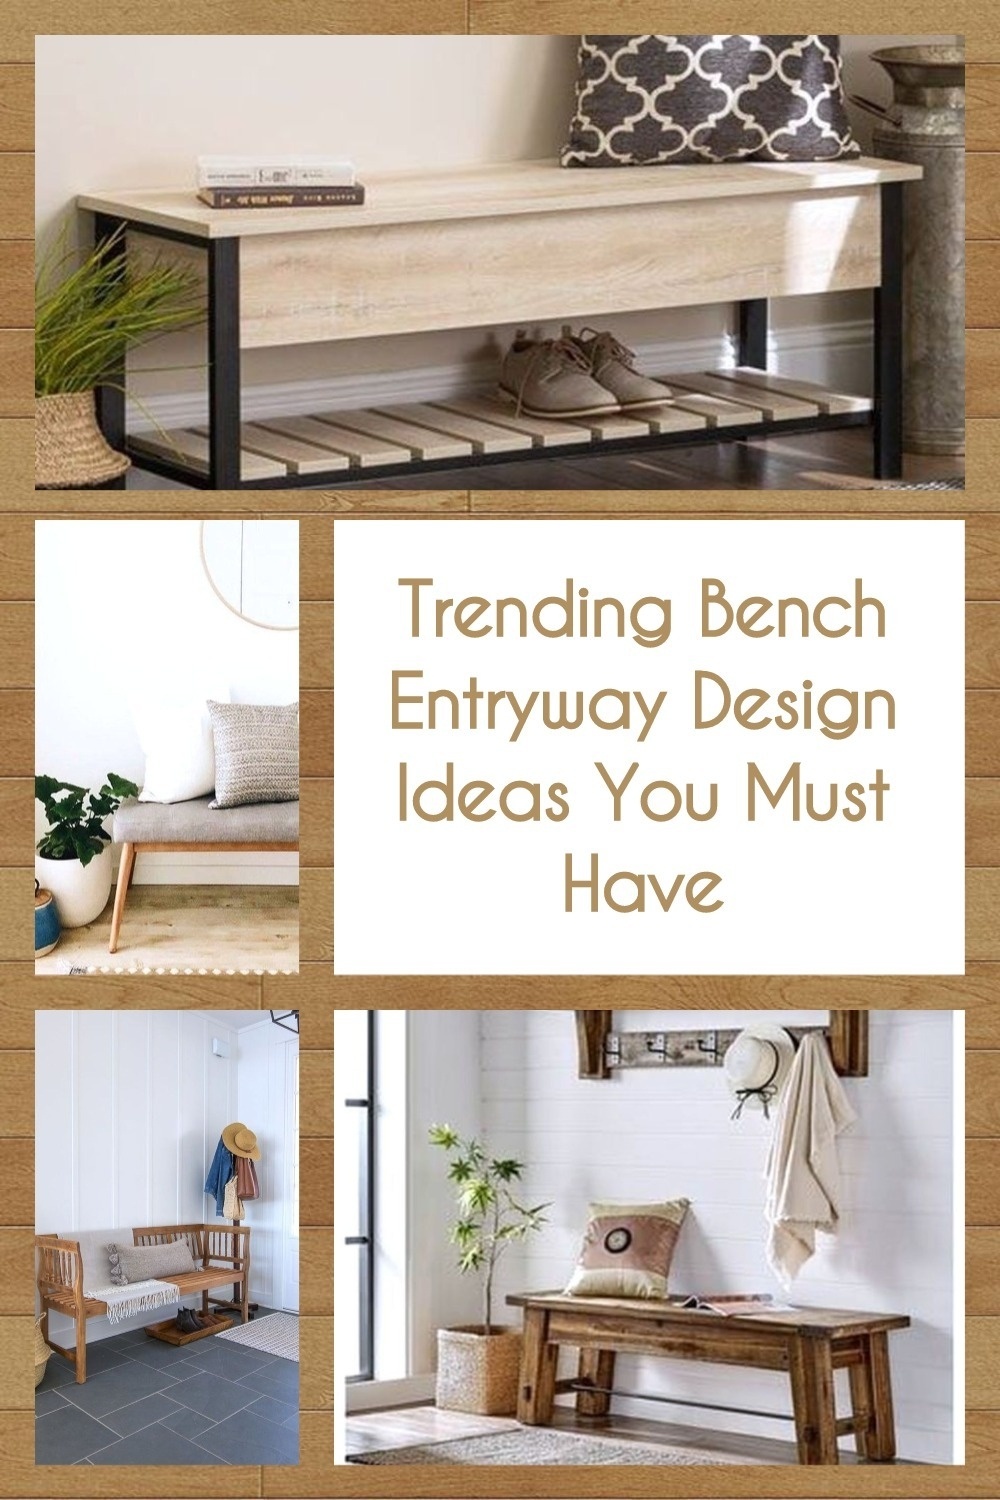 Trending Bench Entryway Design Ideas You Must Have